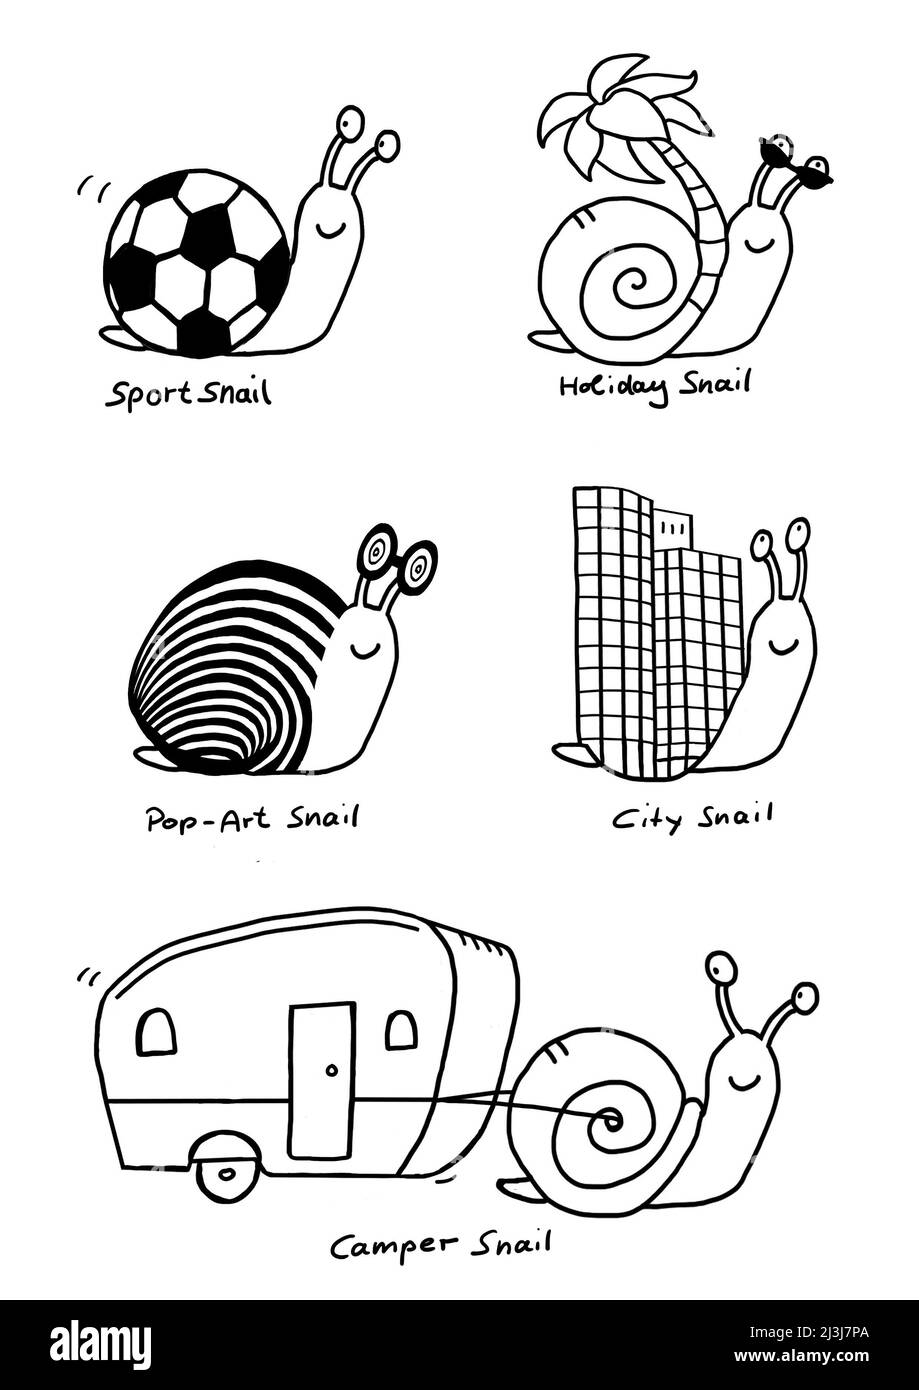 Illustration, snails as funny creatures, b/w Stock Photo